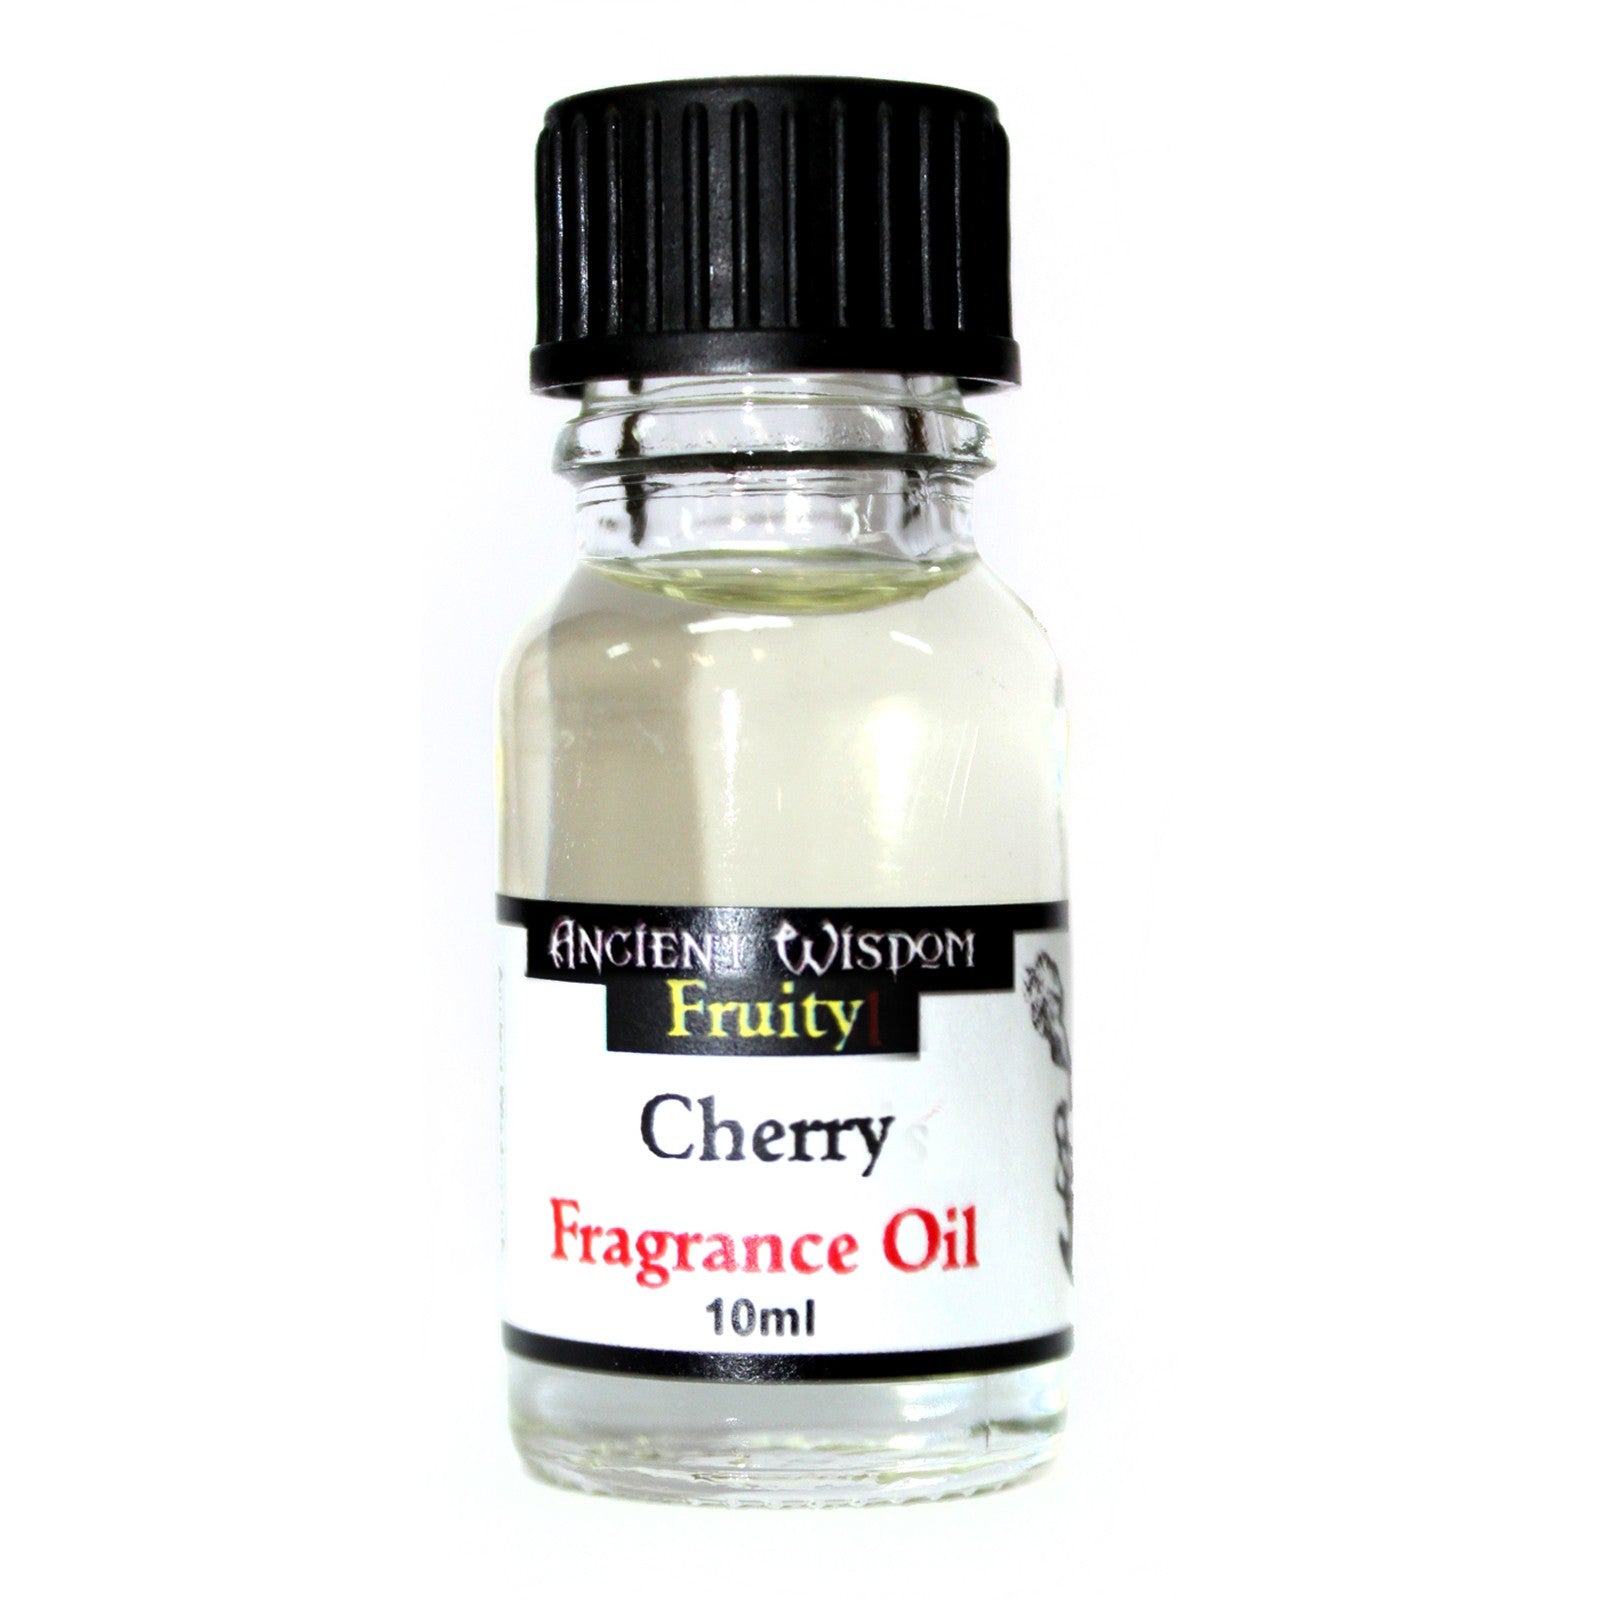 View 10ml Cherry Fragrance Oil information